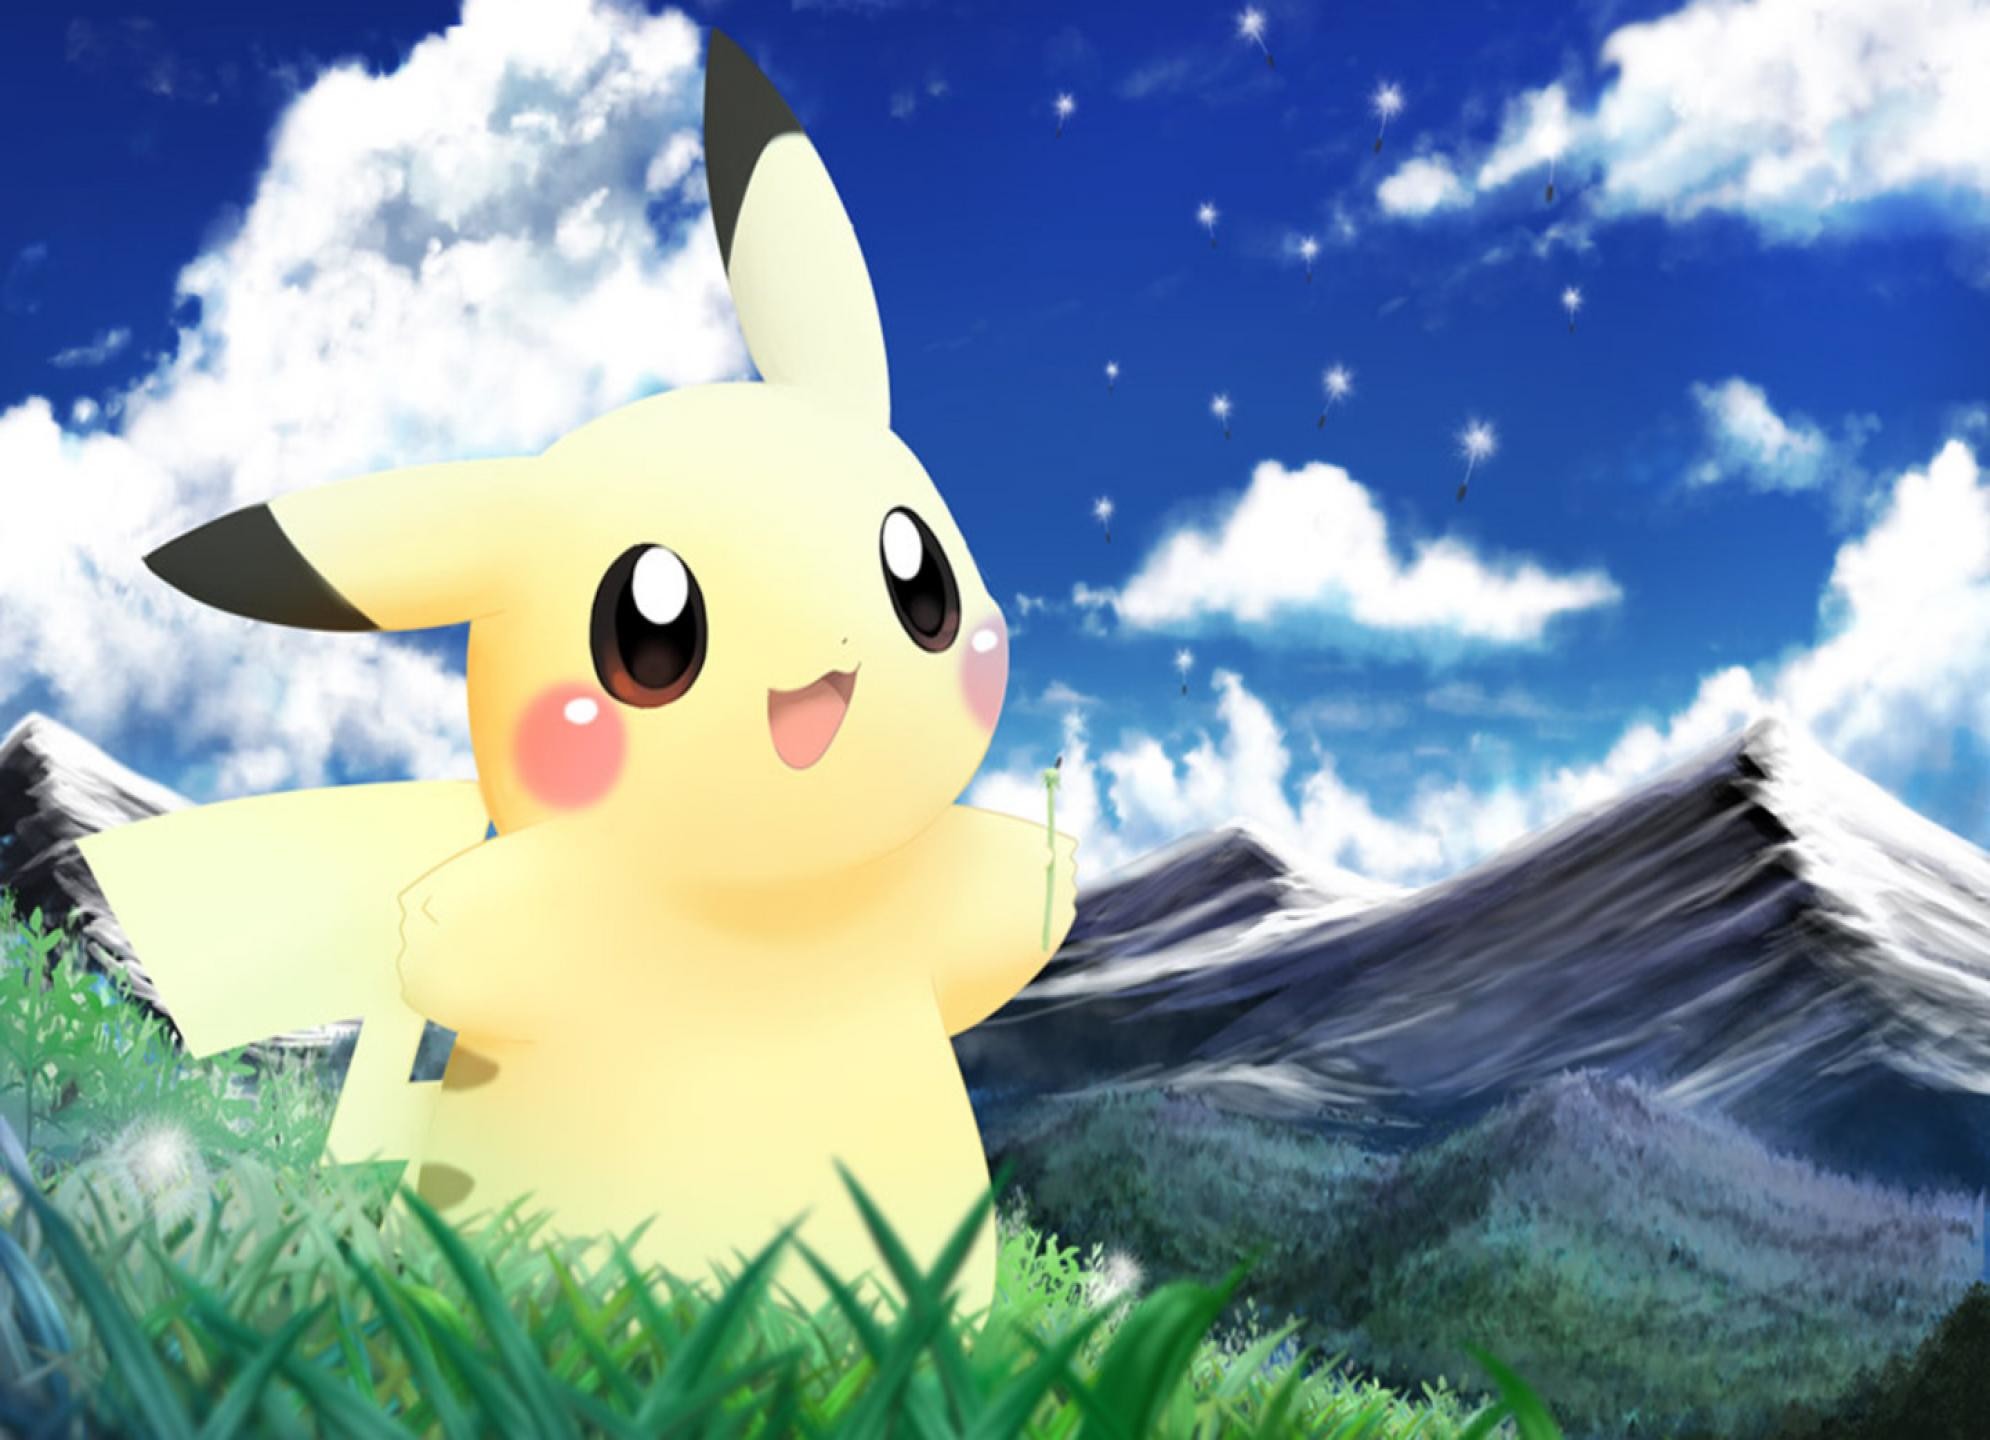 HD Wallpaper and background photos of Pikachu Wallpaper for fans of Pikachu images